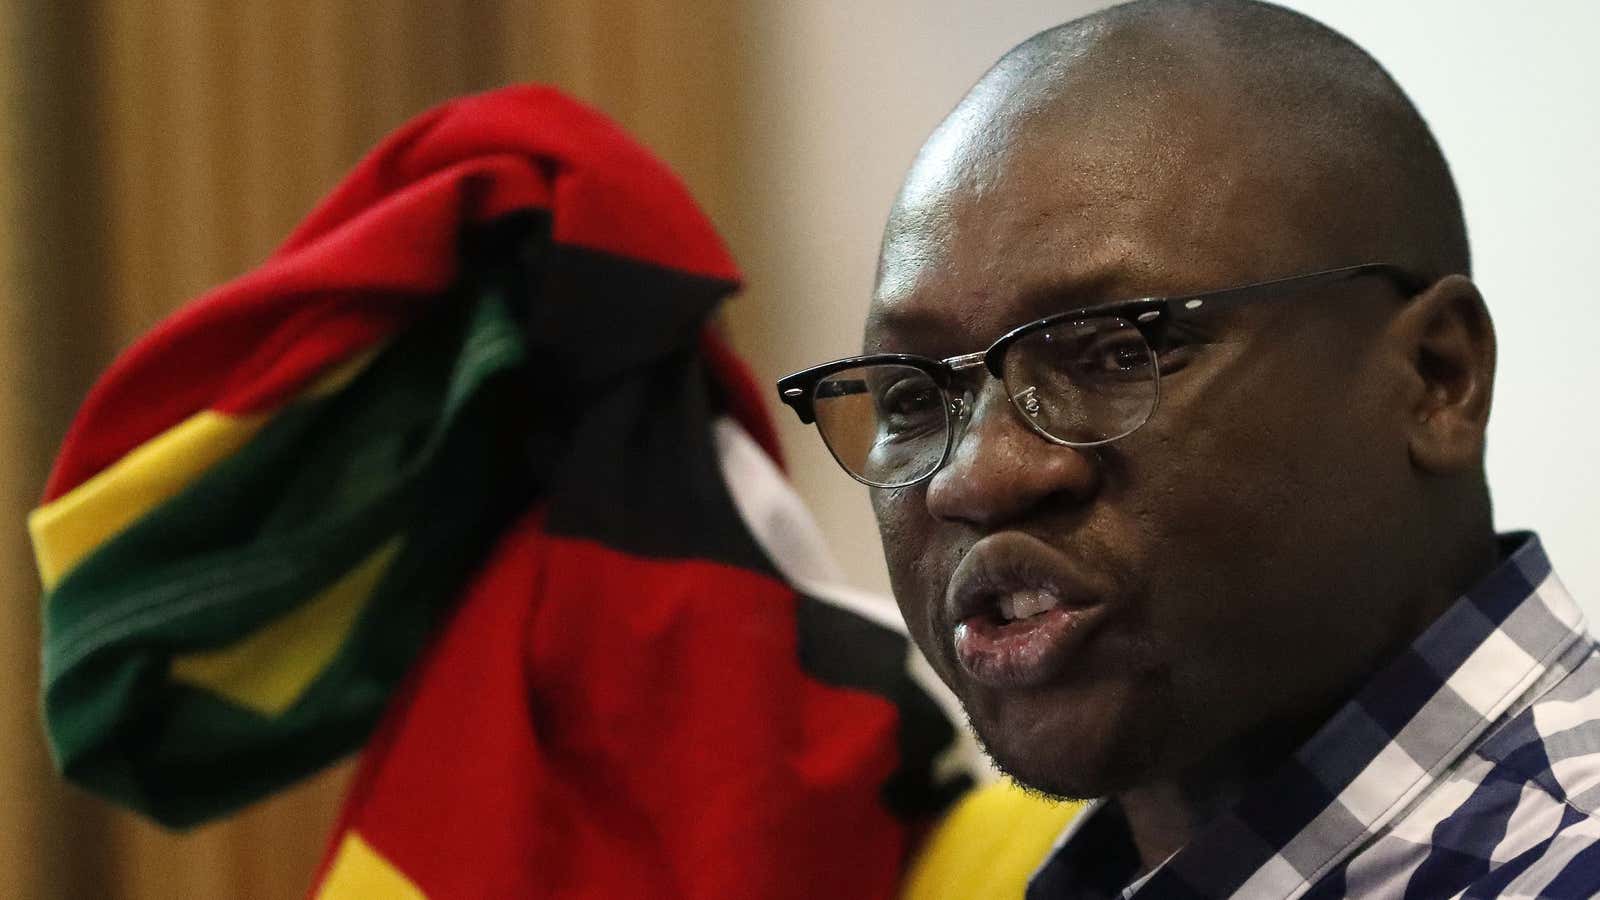 Zimbabwean pastor Evan Mawarire, holds his national flag whilst addressing supporters at the University of the Witwatersrand in Johannesburg, South Africa on July 28.